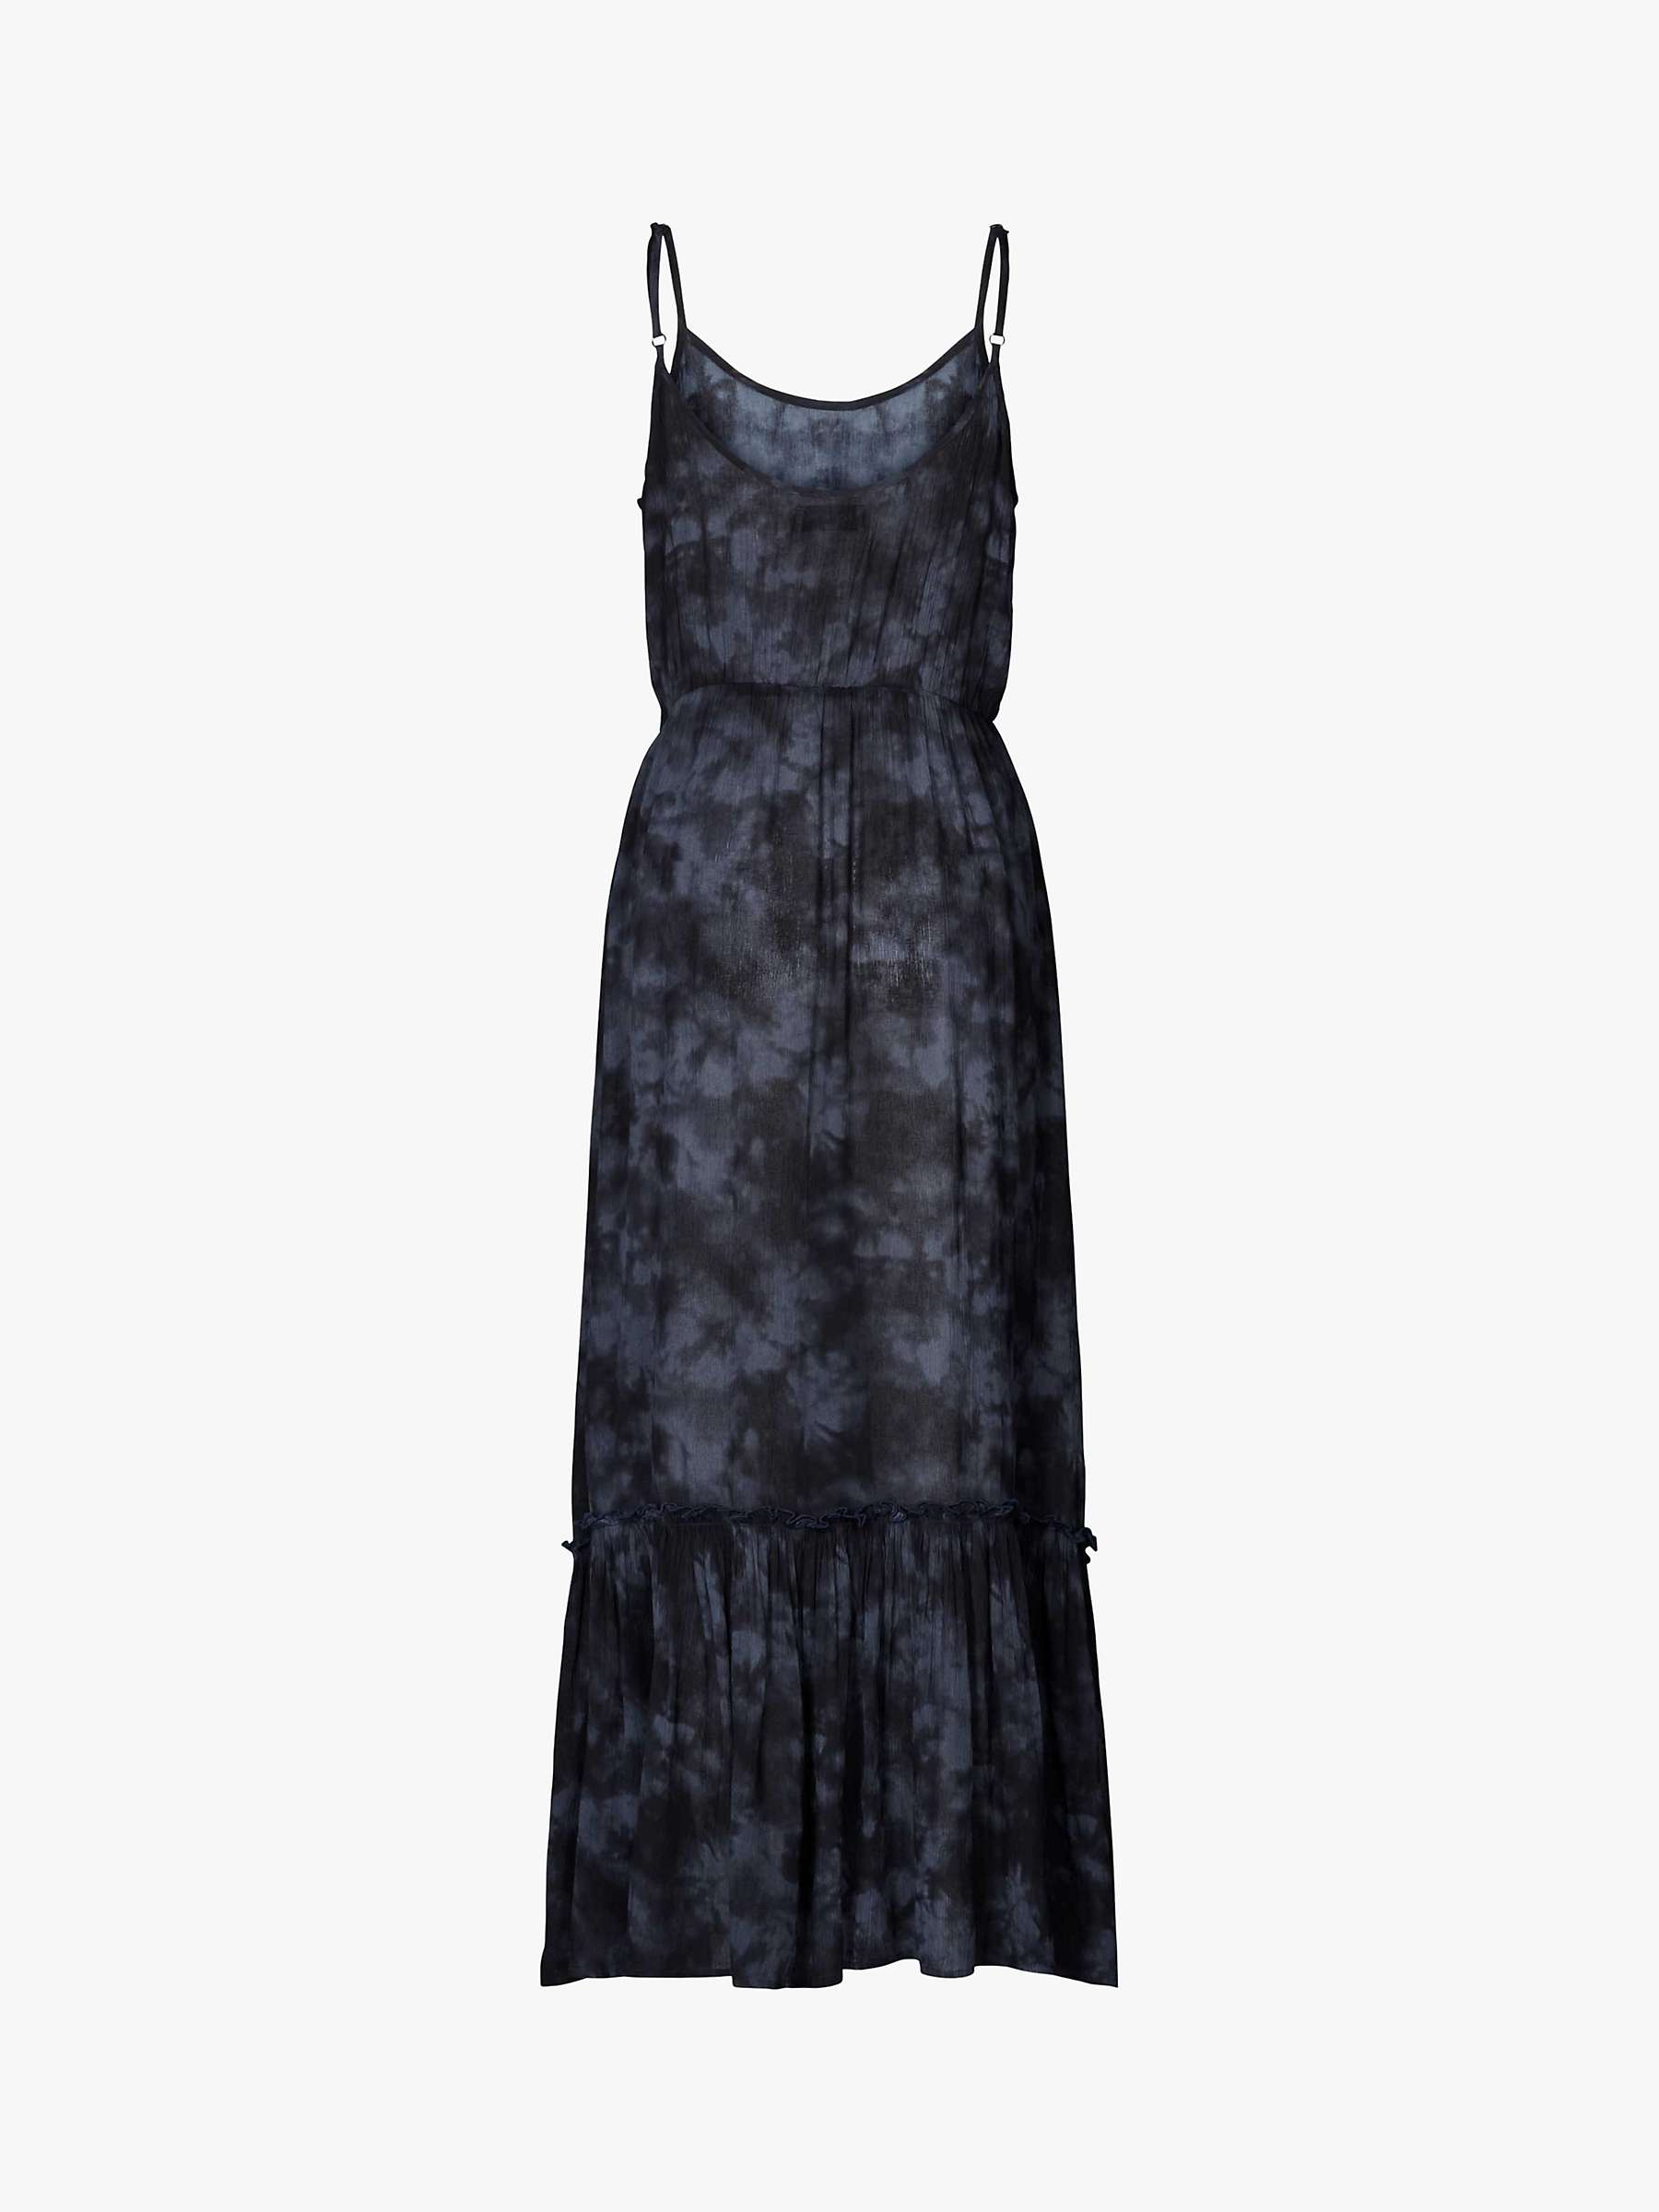 Buy Lollys Laundry Uno Maxi Dress, Washed Black Online at johnlewis.com